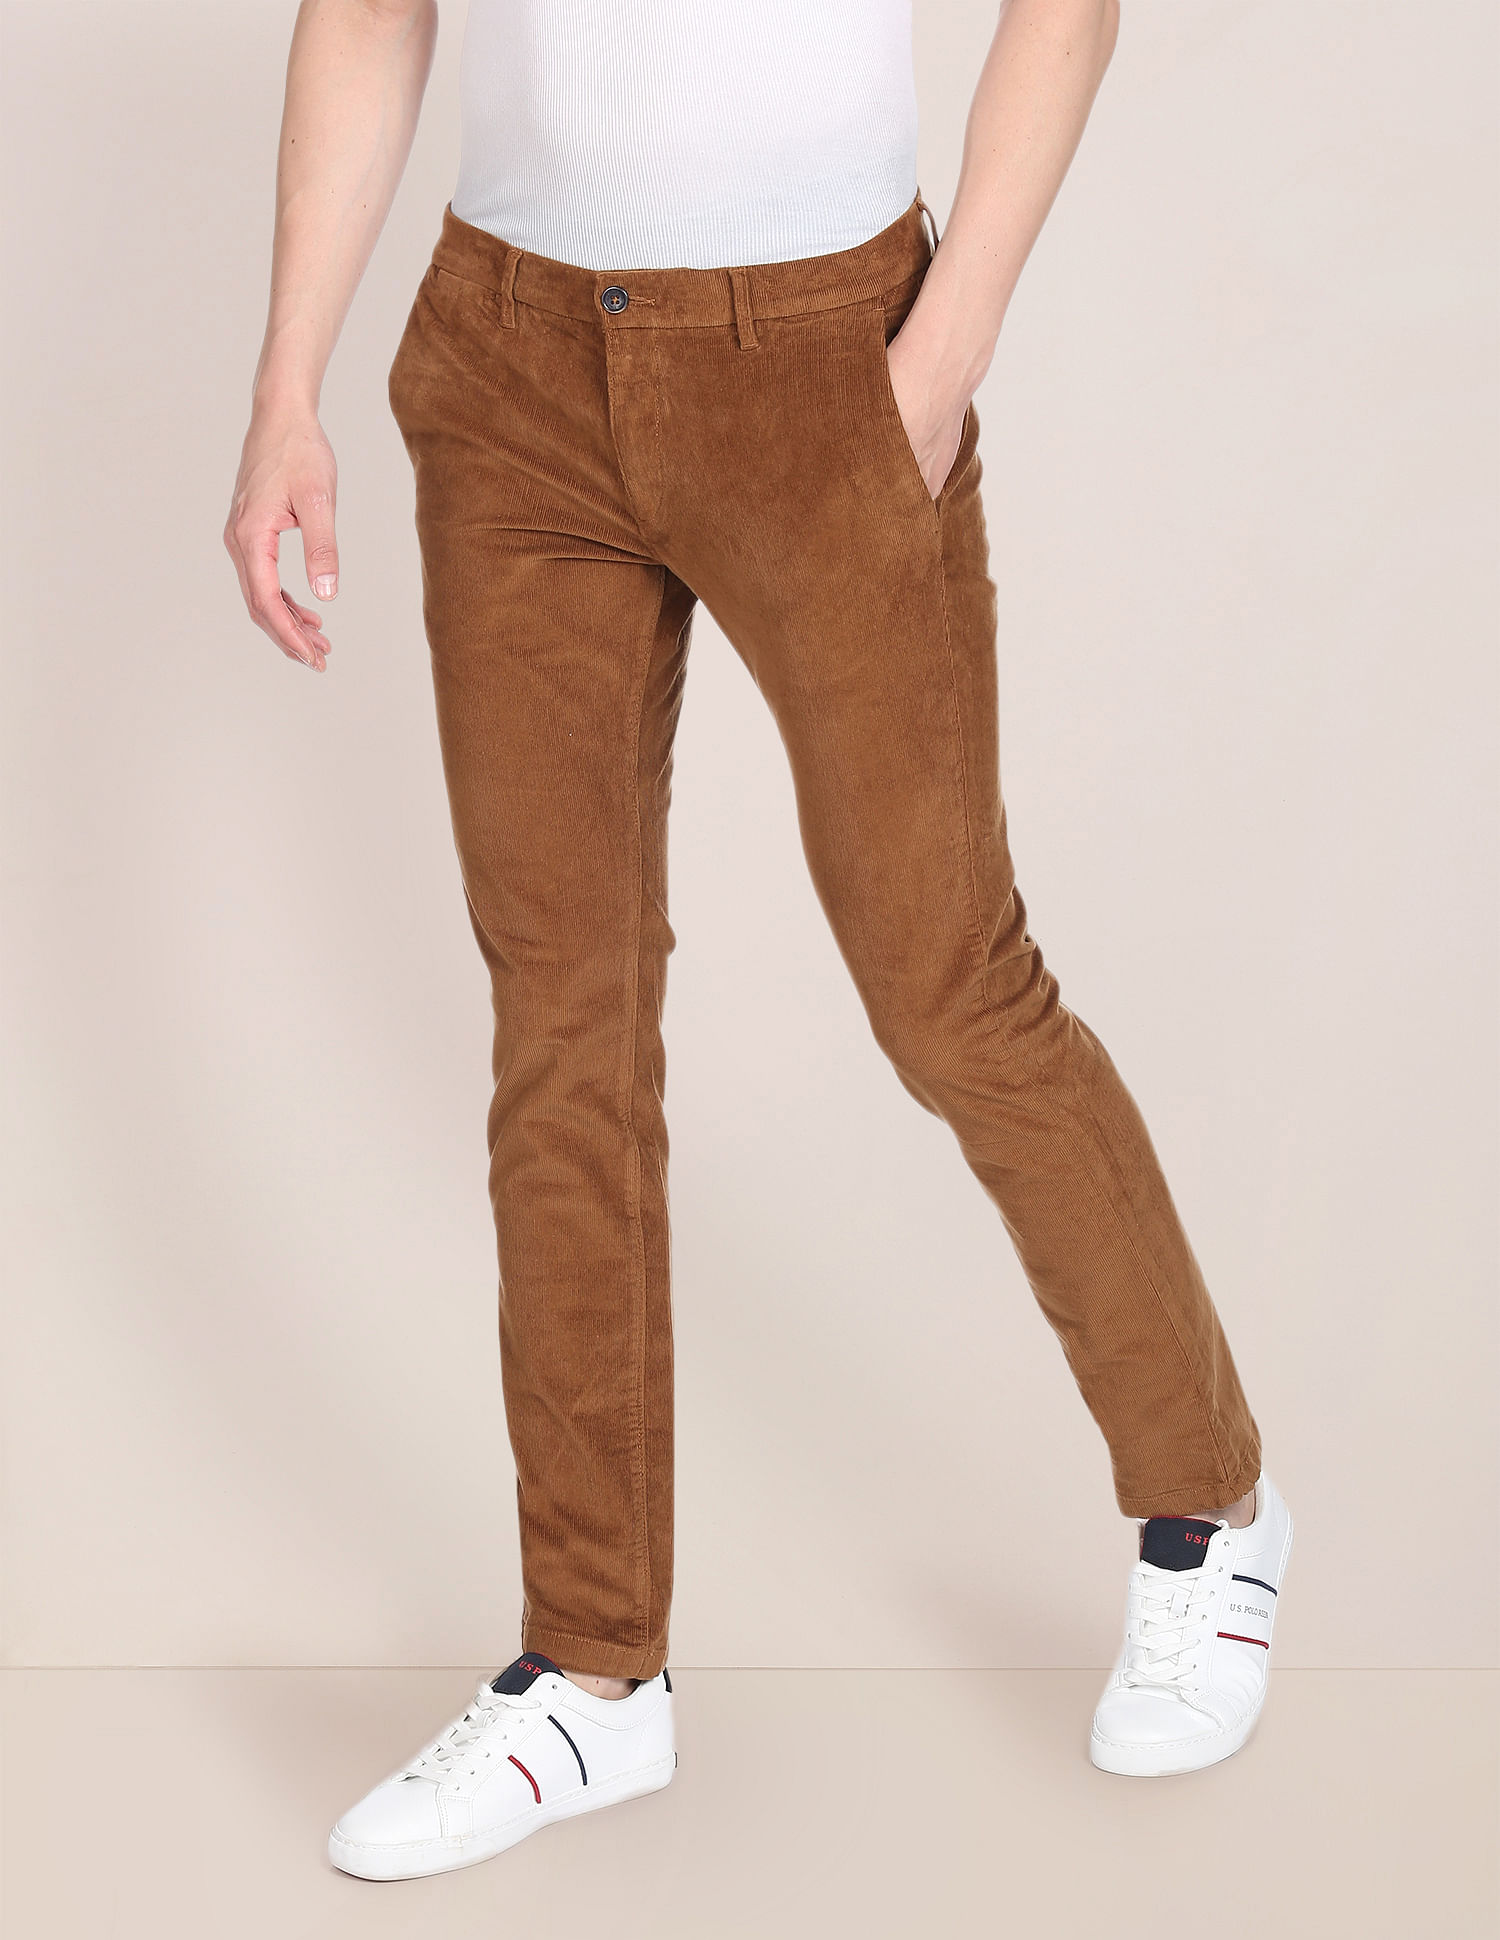 Corduroy brown 5-pocket - pant made in USA from French corduroy